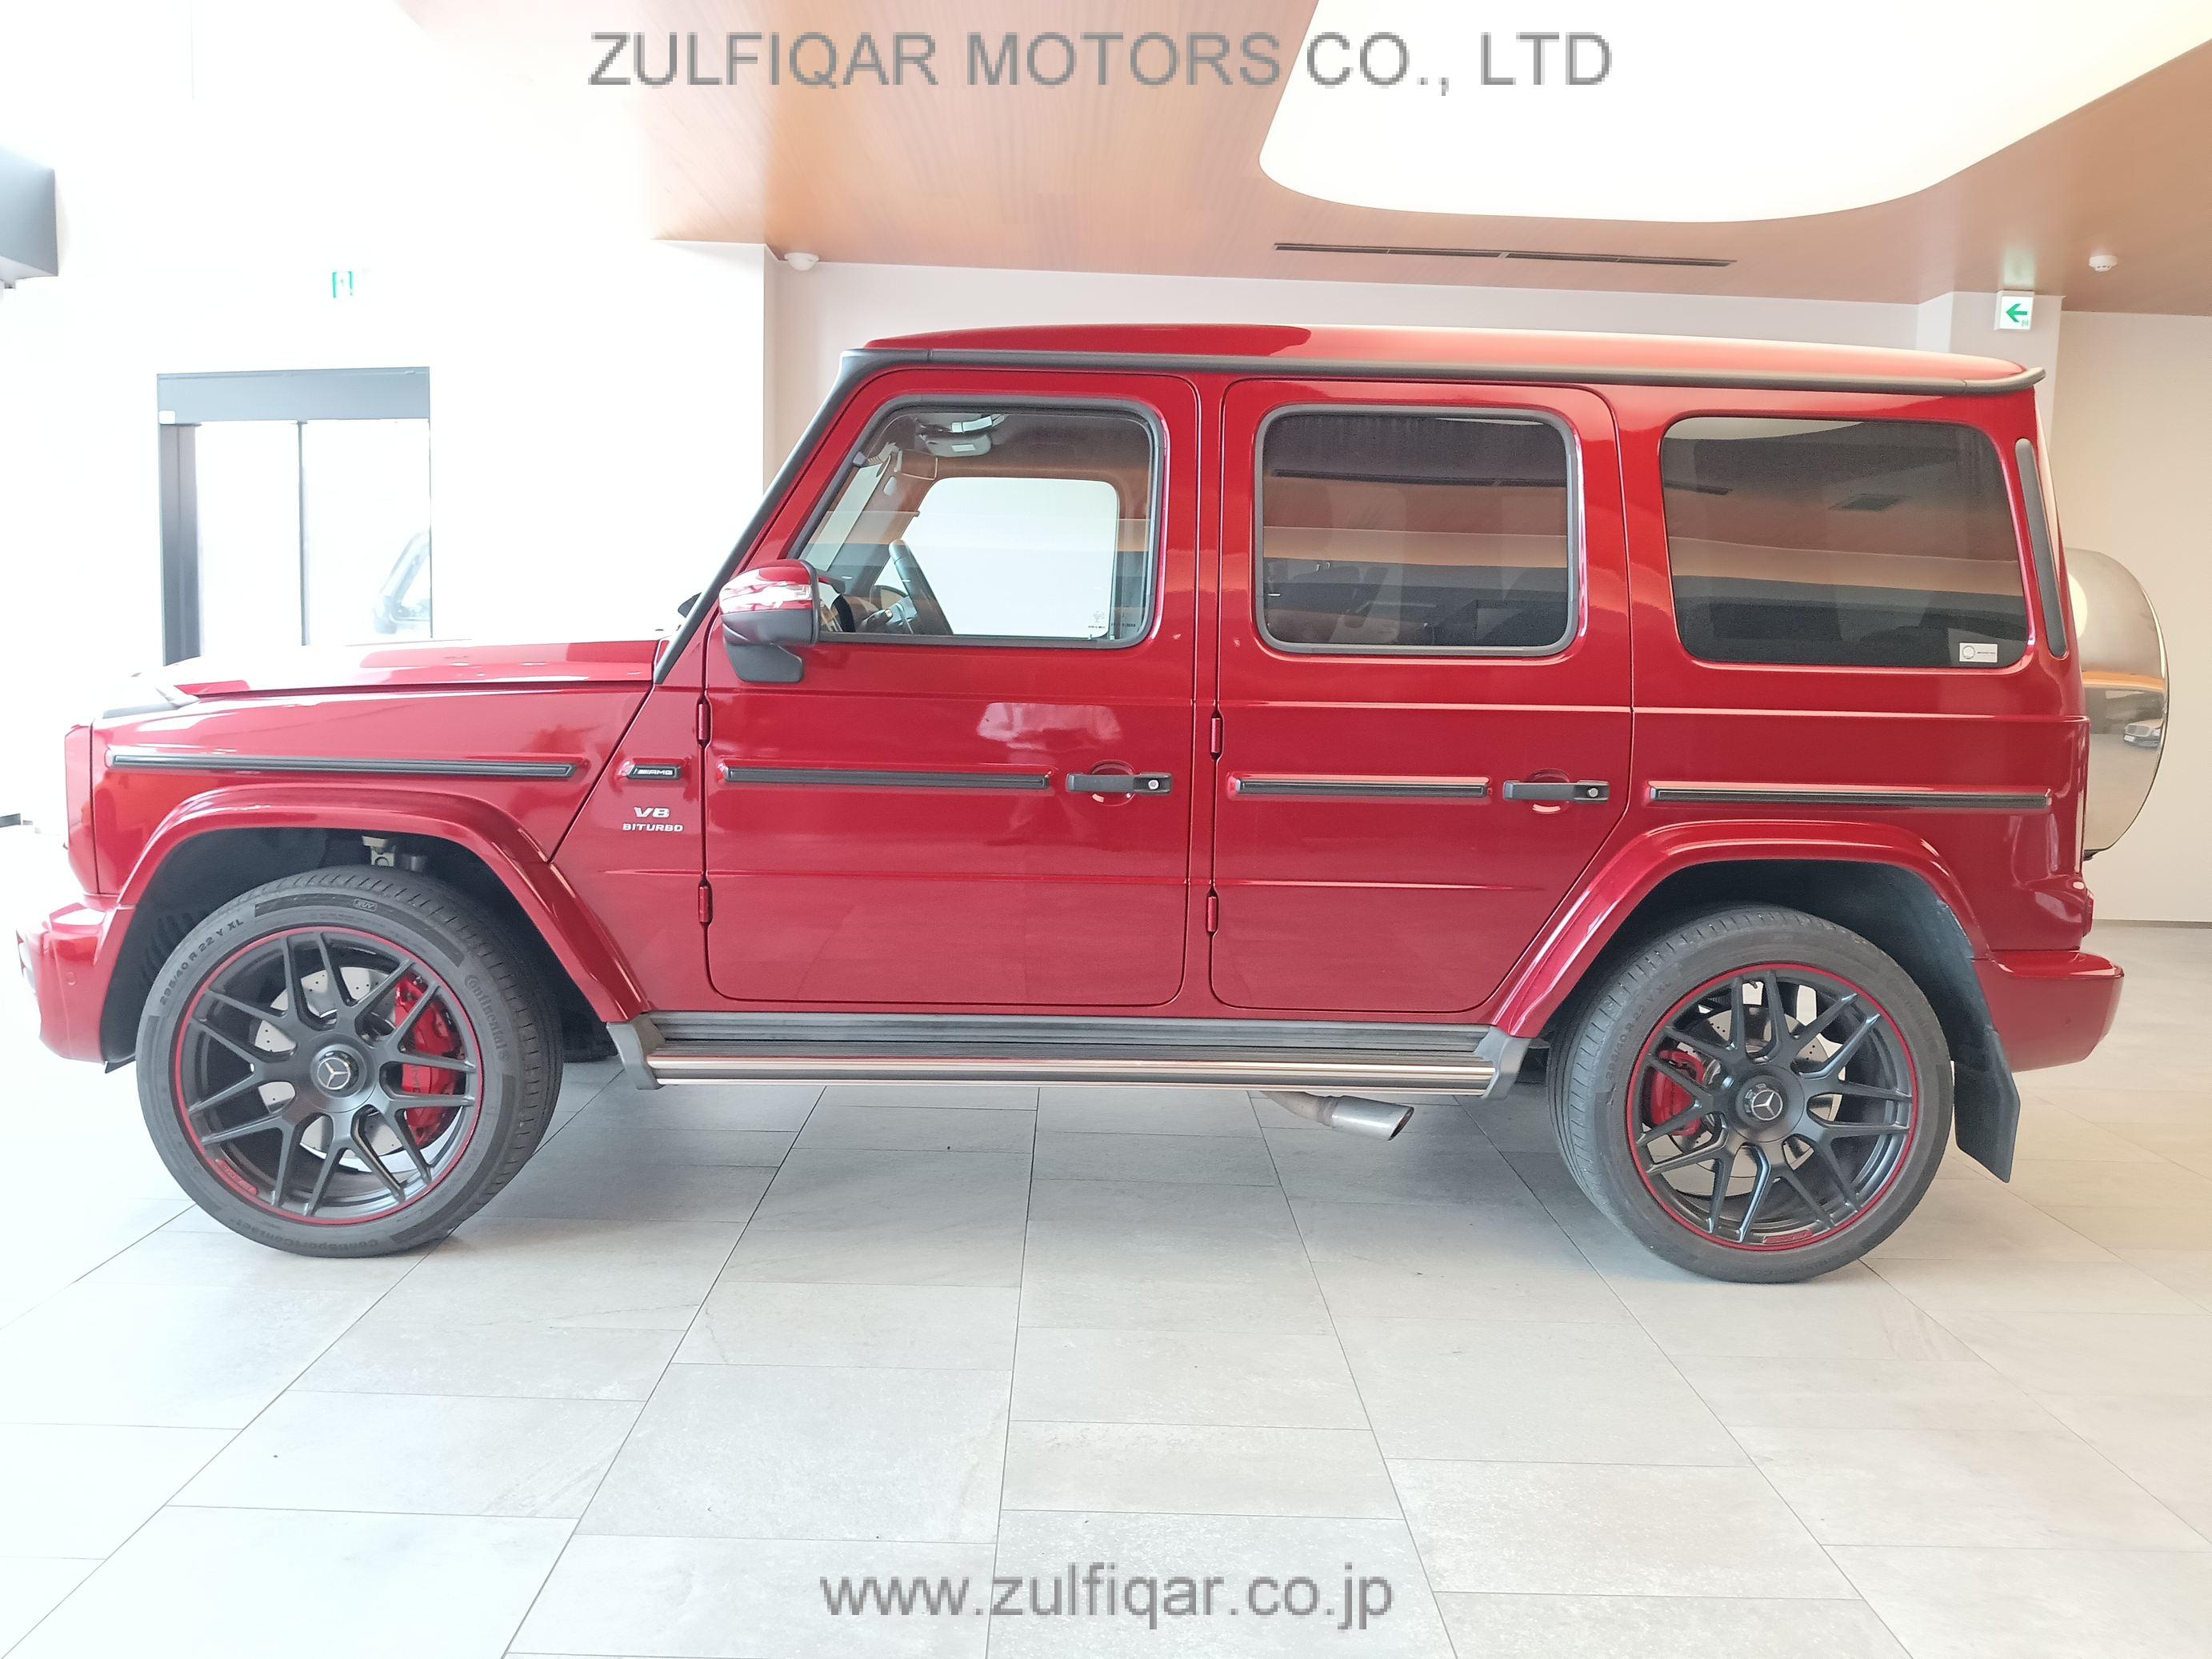 MERCEDES AMG G CLASS 2019 Image 31